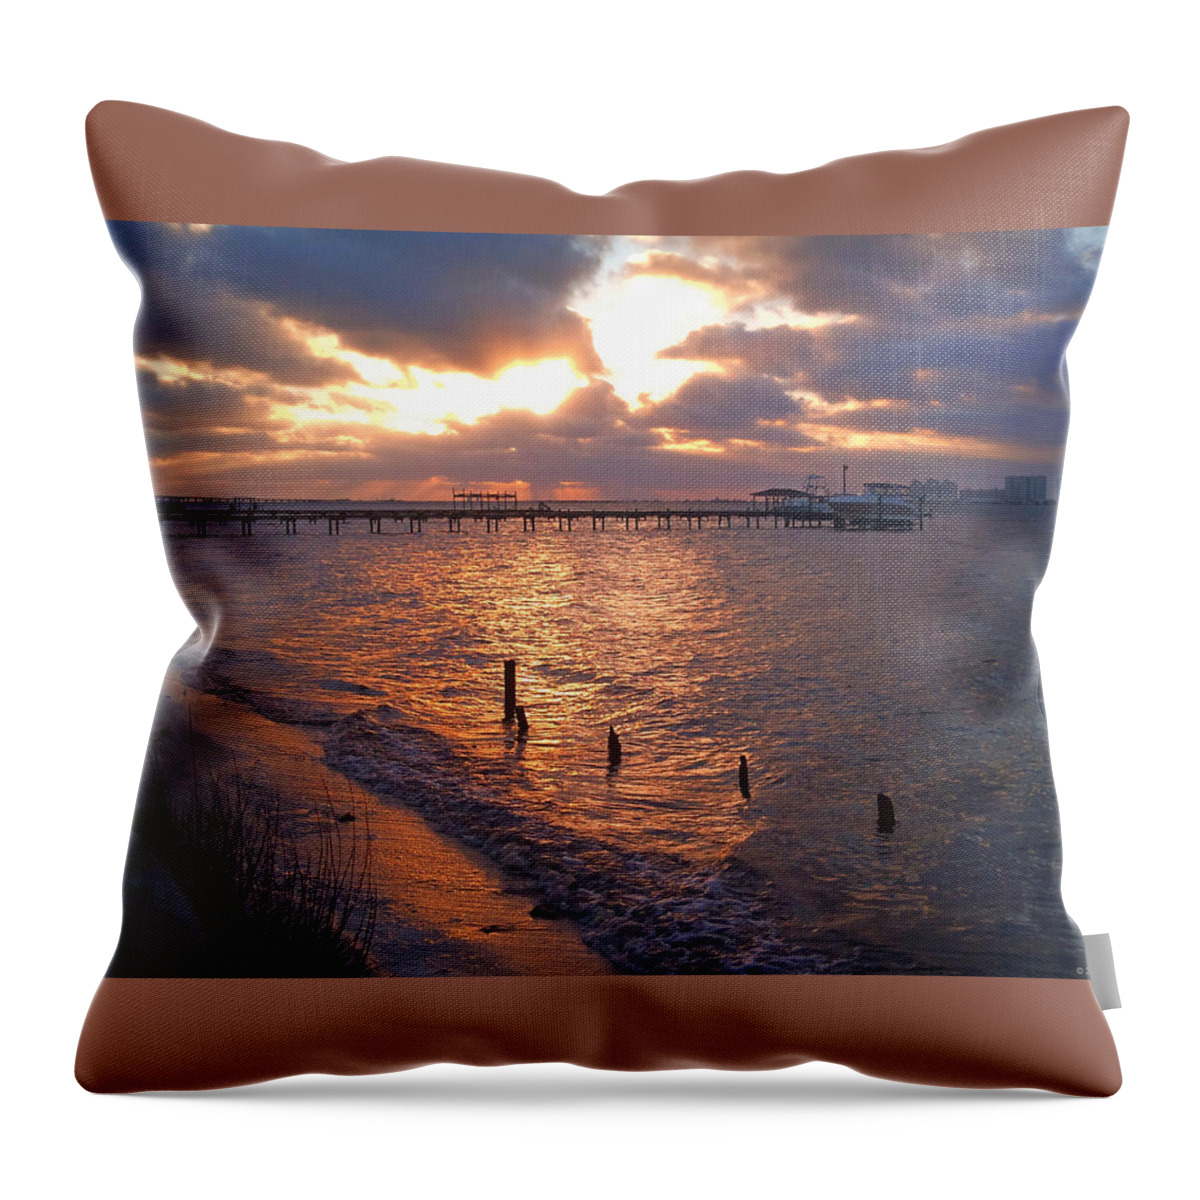 20120111 Throw Pillow featuring the photograph 0111 Sunrise on Sound by Jeff at JSJ Photography